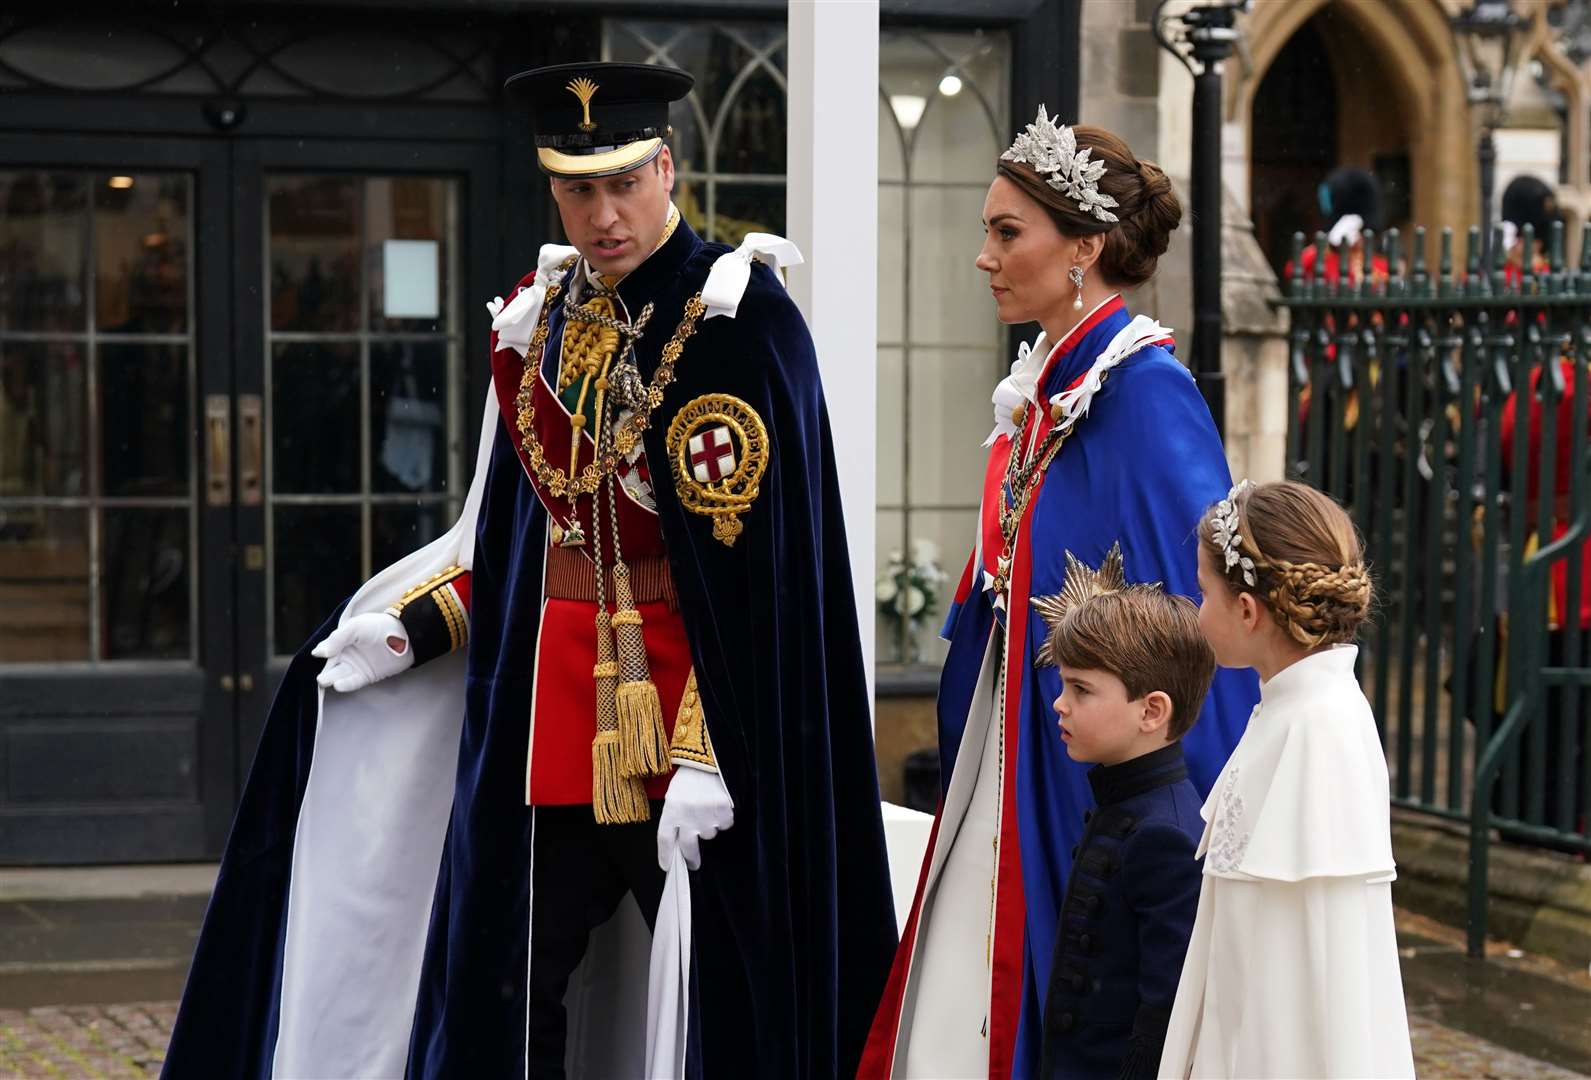 The Prince and Princess of Wales with Princess Charlotte and Prince Louis ahead of the coronation ceremony (Andrew Milligan/PA)